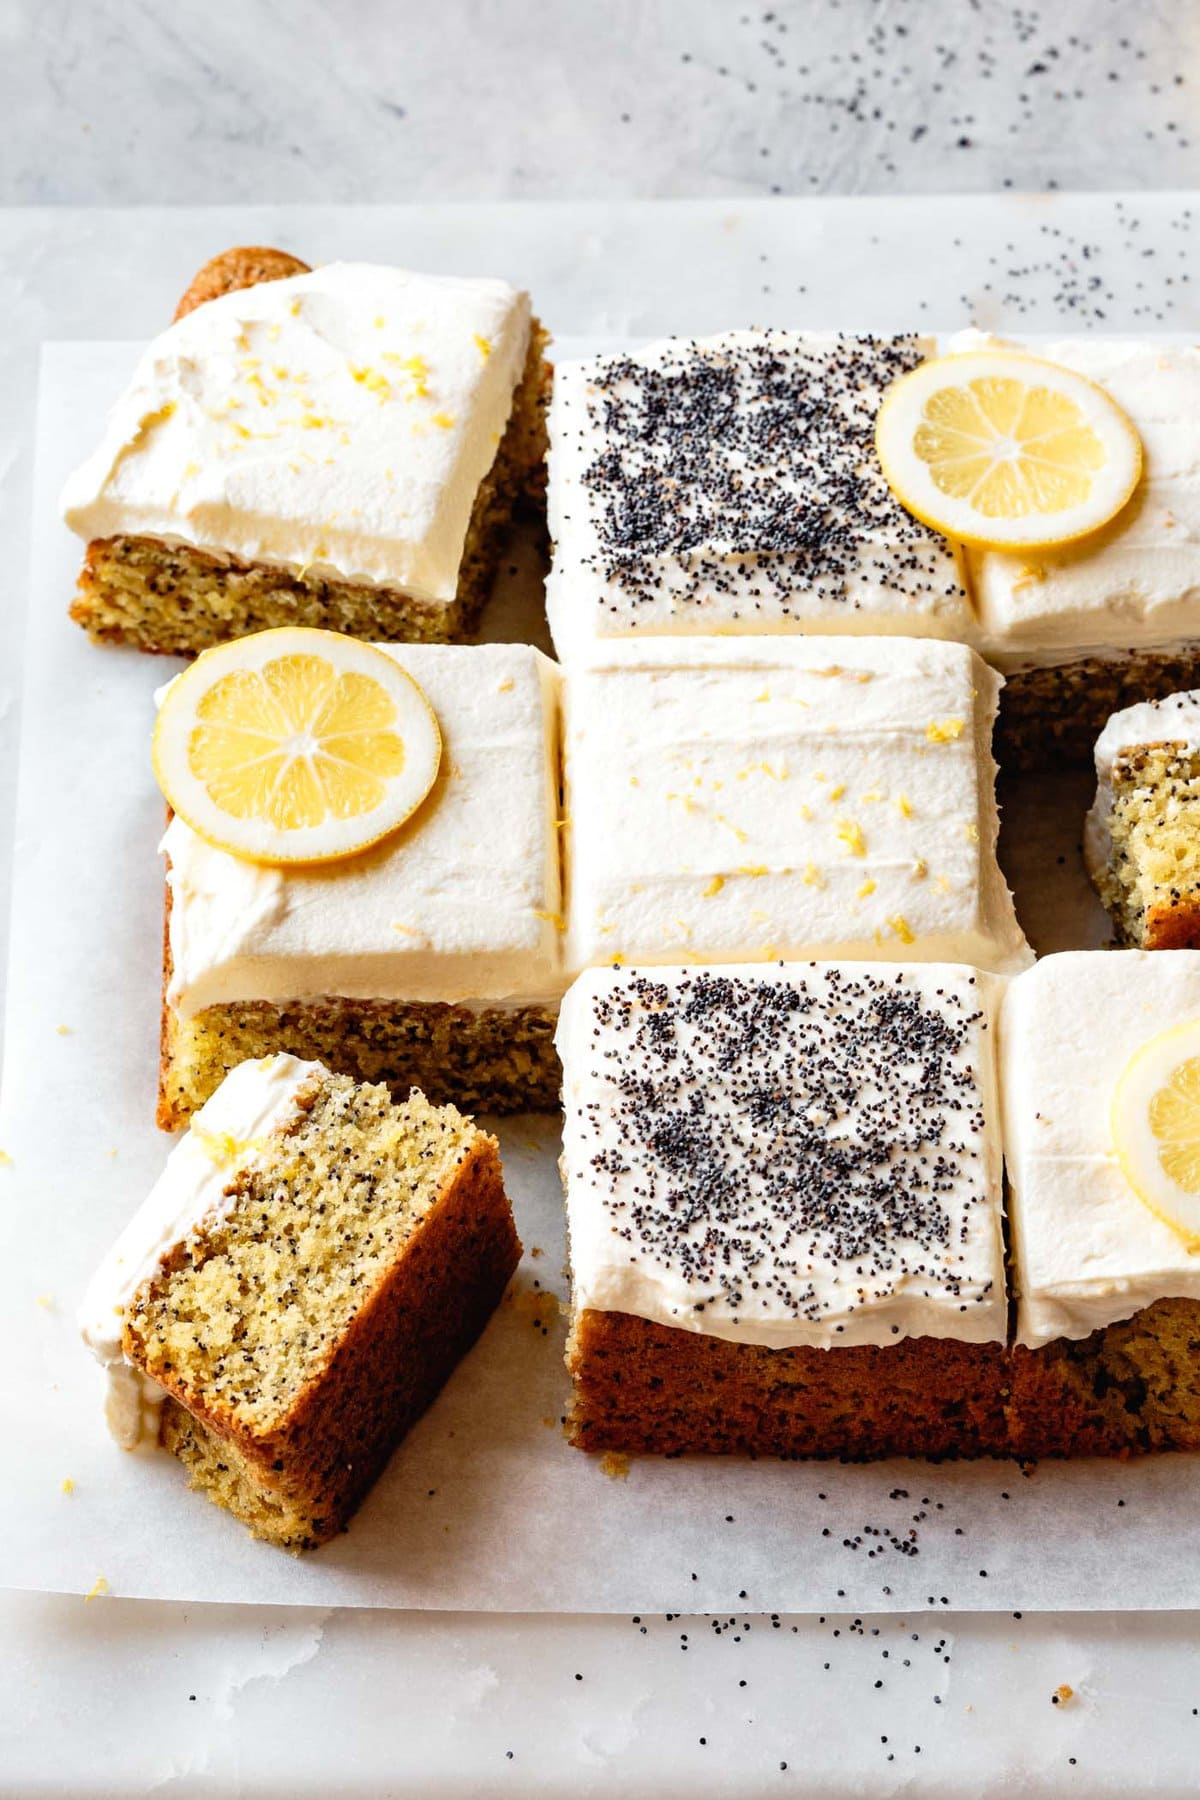 Lemon cake has been decorated with lemon wheels and poppy seeds and cut into 9 squares for the nomming.